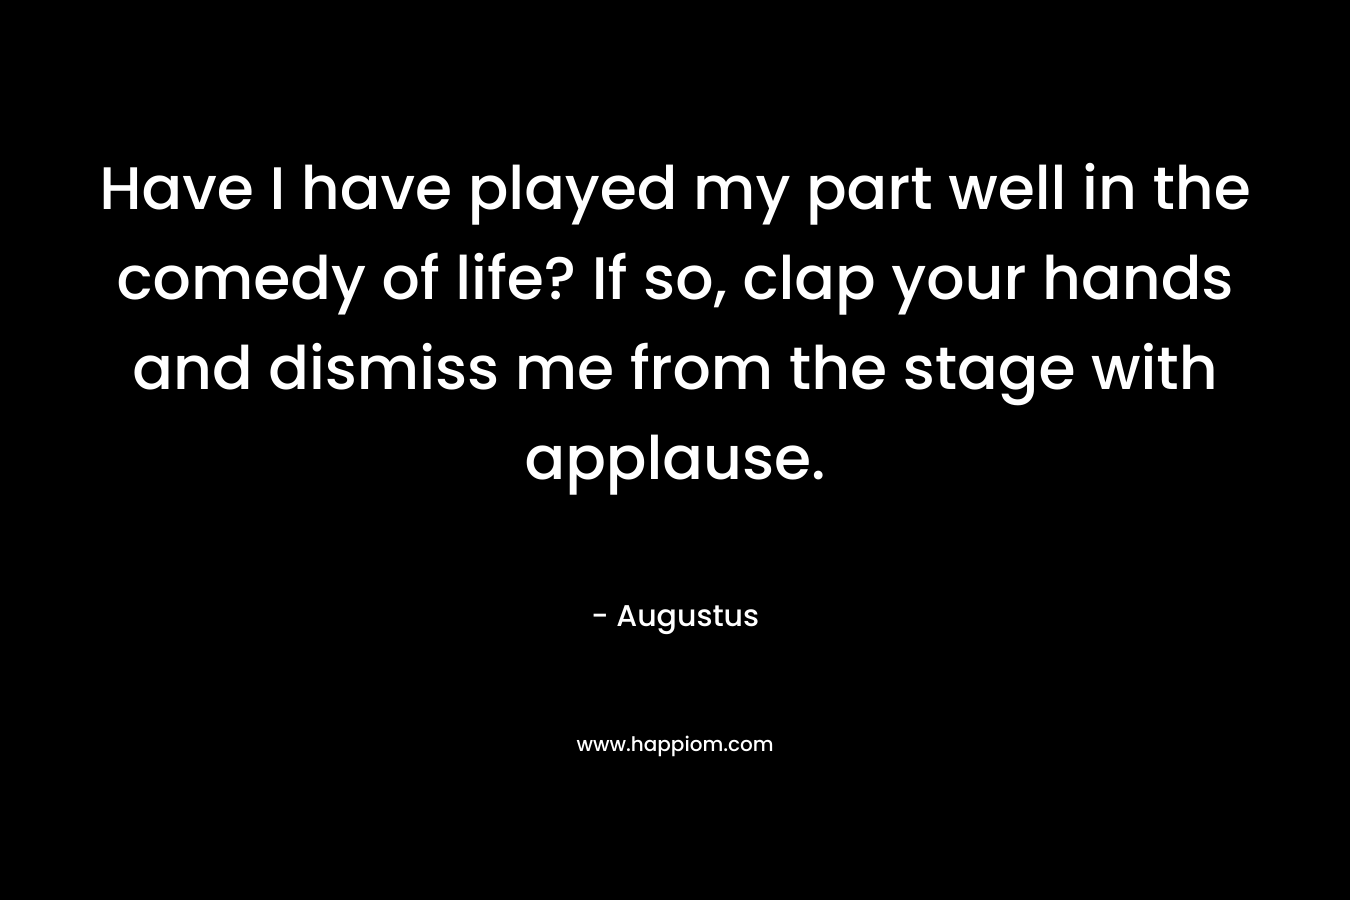 Have I have played my part well in the comedy of life? If so, clap your hands and dismiss me from the stage with applause. – Augustus